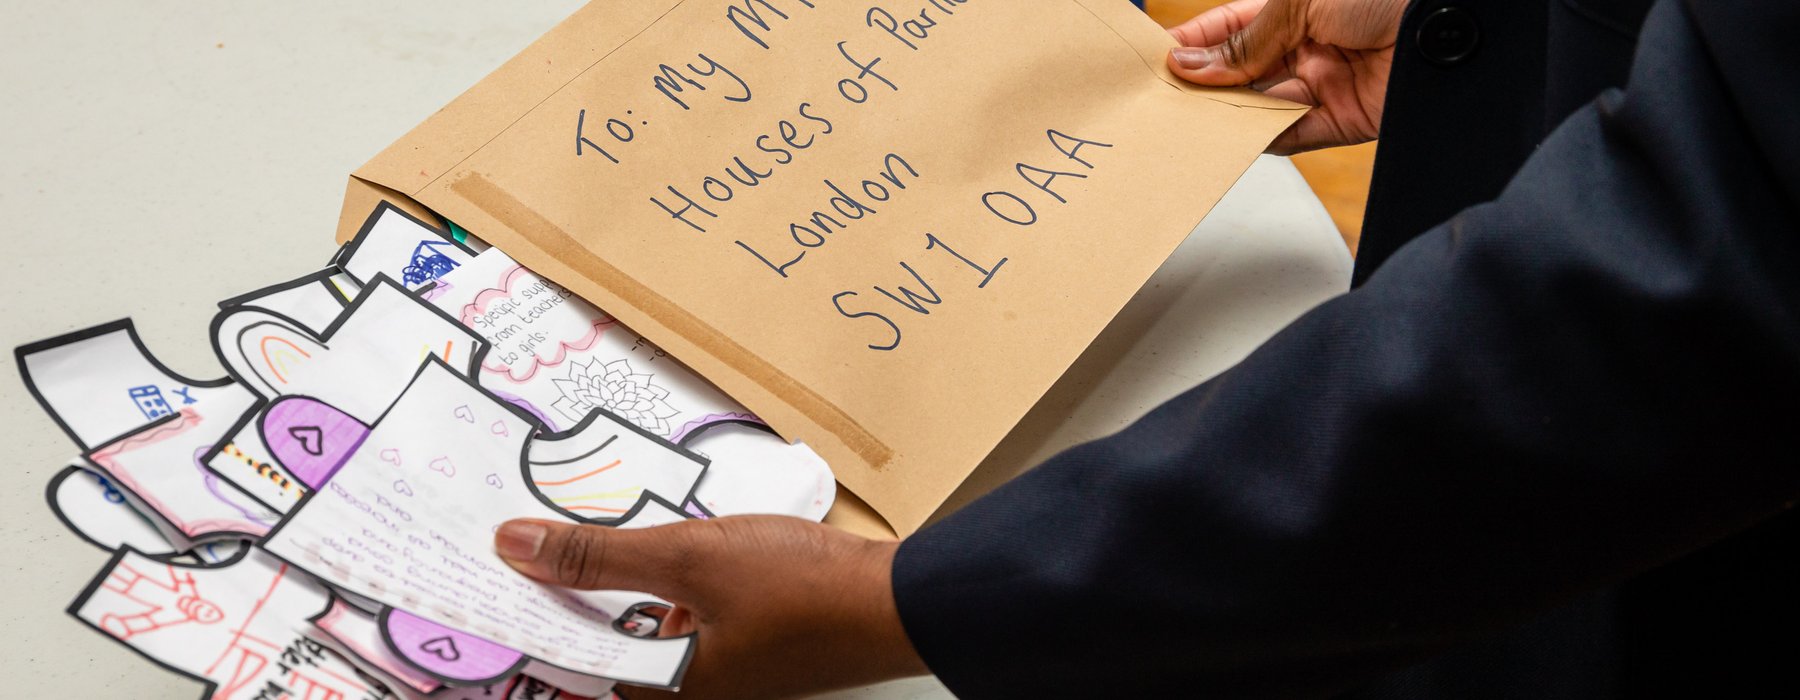 A brown envelope with: To: My Mp, Houses of Parliament, London, SW1 OAA is backed with drawings and writing on paper in the shape of giant puzzle pieces by a child.